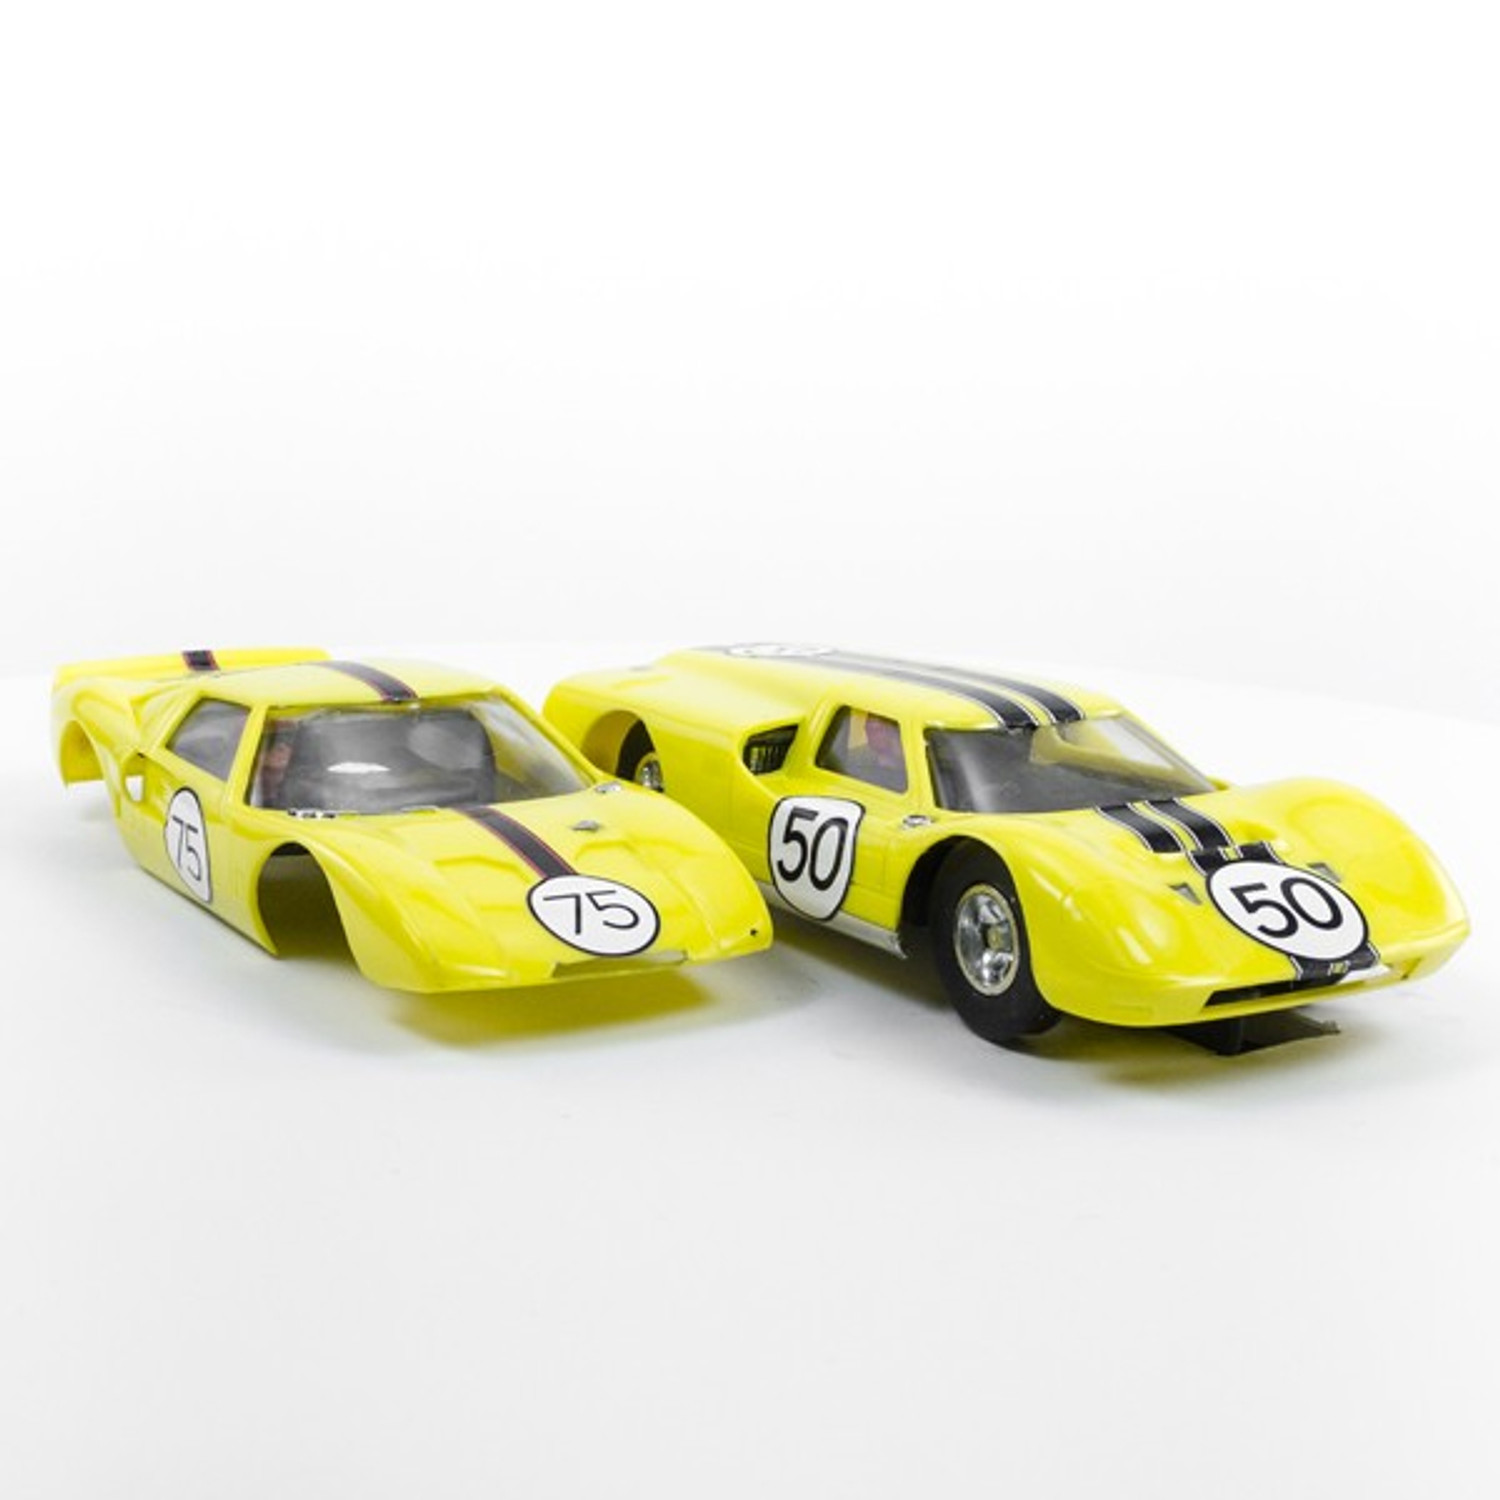 Stock Number: 16216 - Yellow Number 50 Car by Unknown